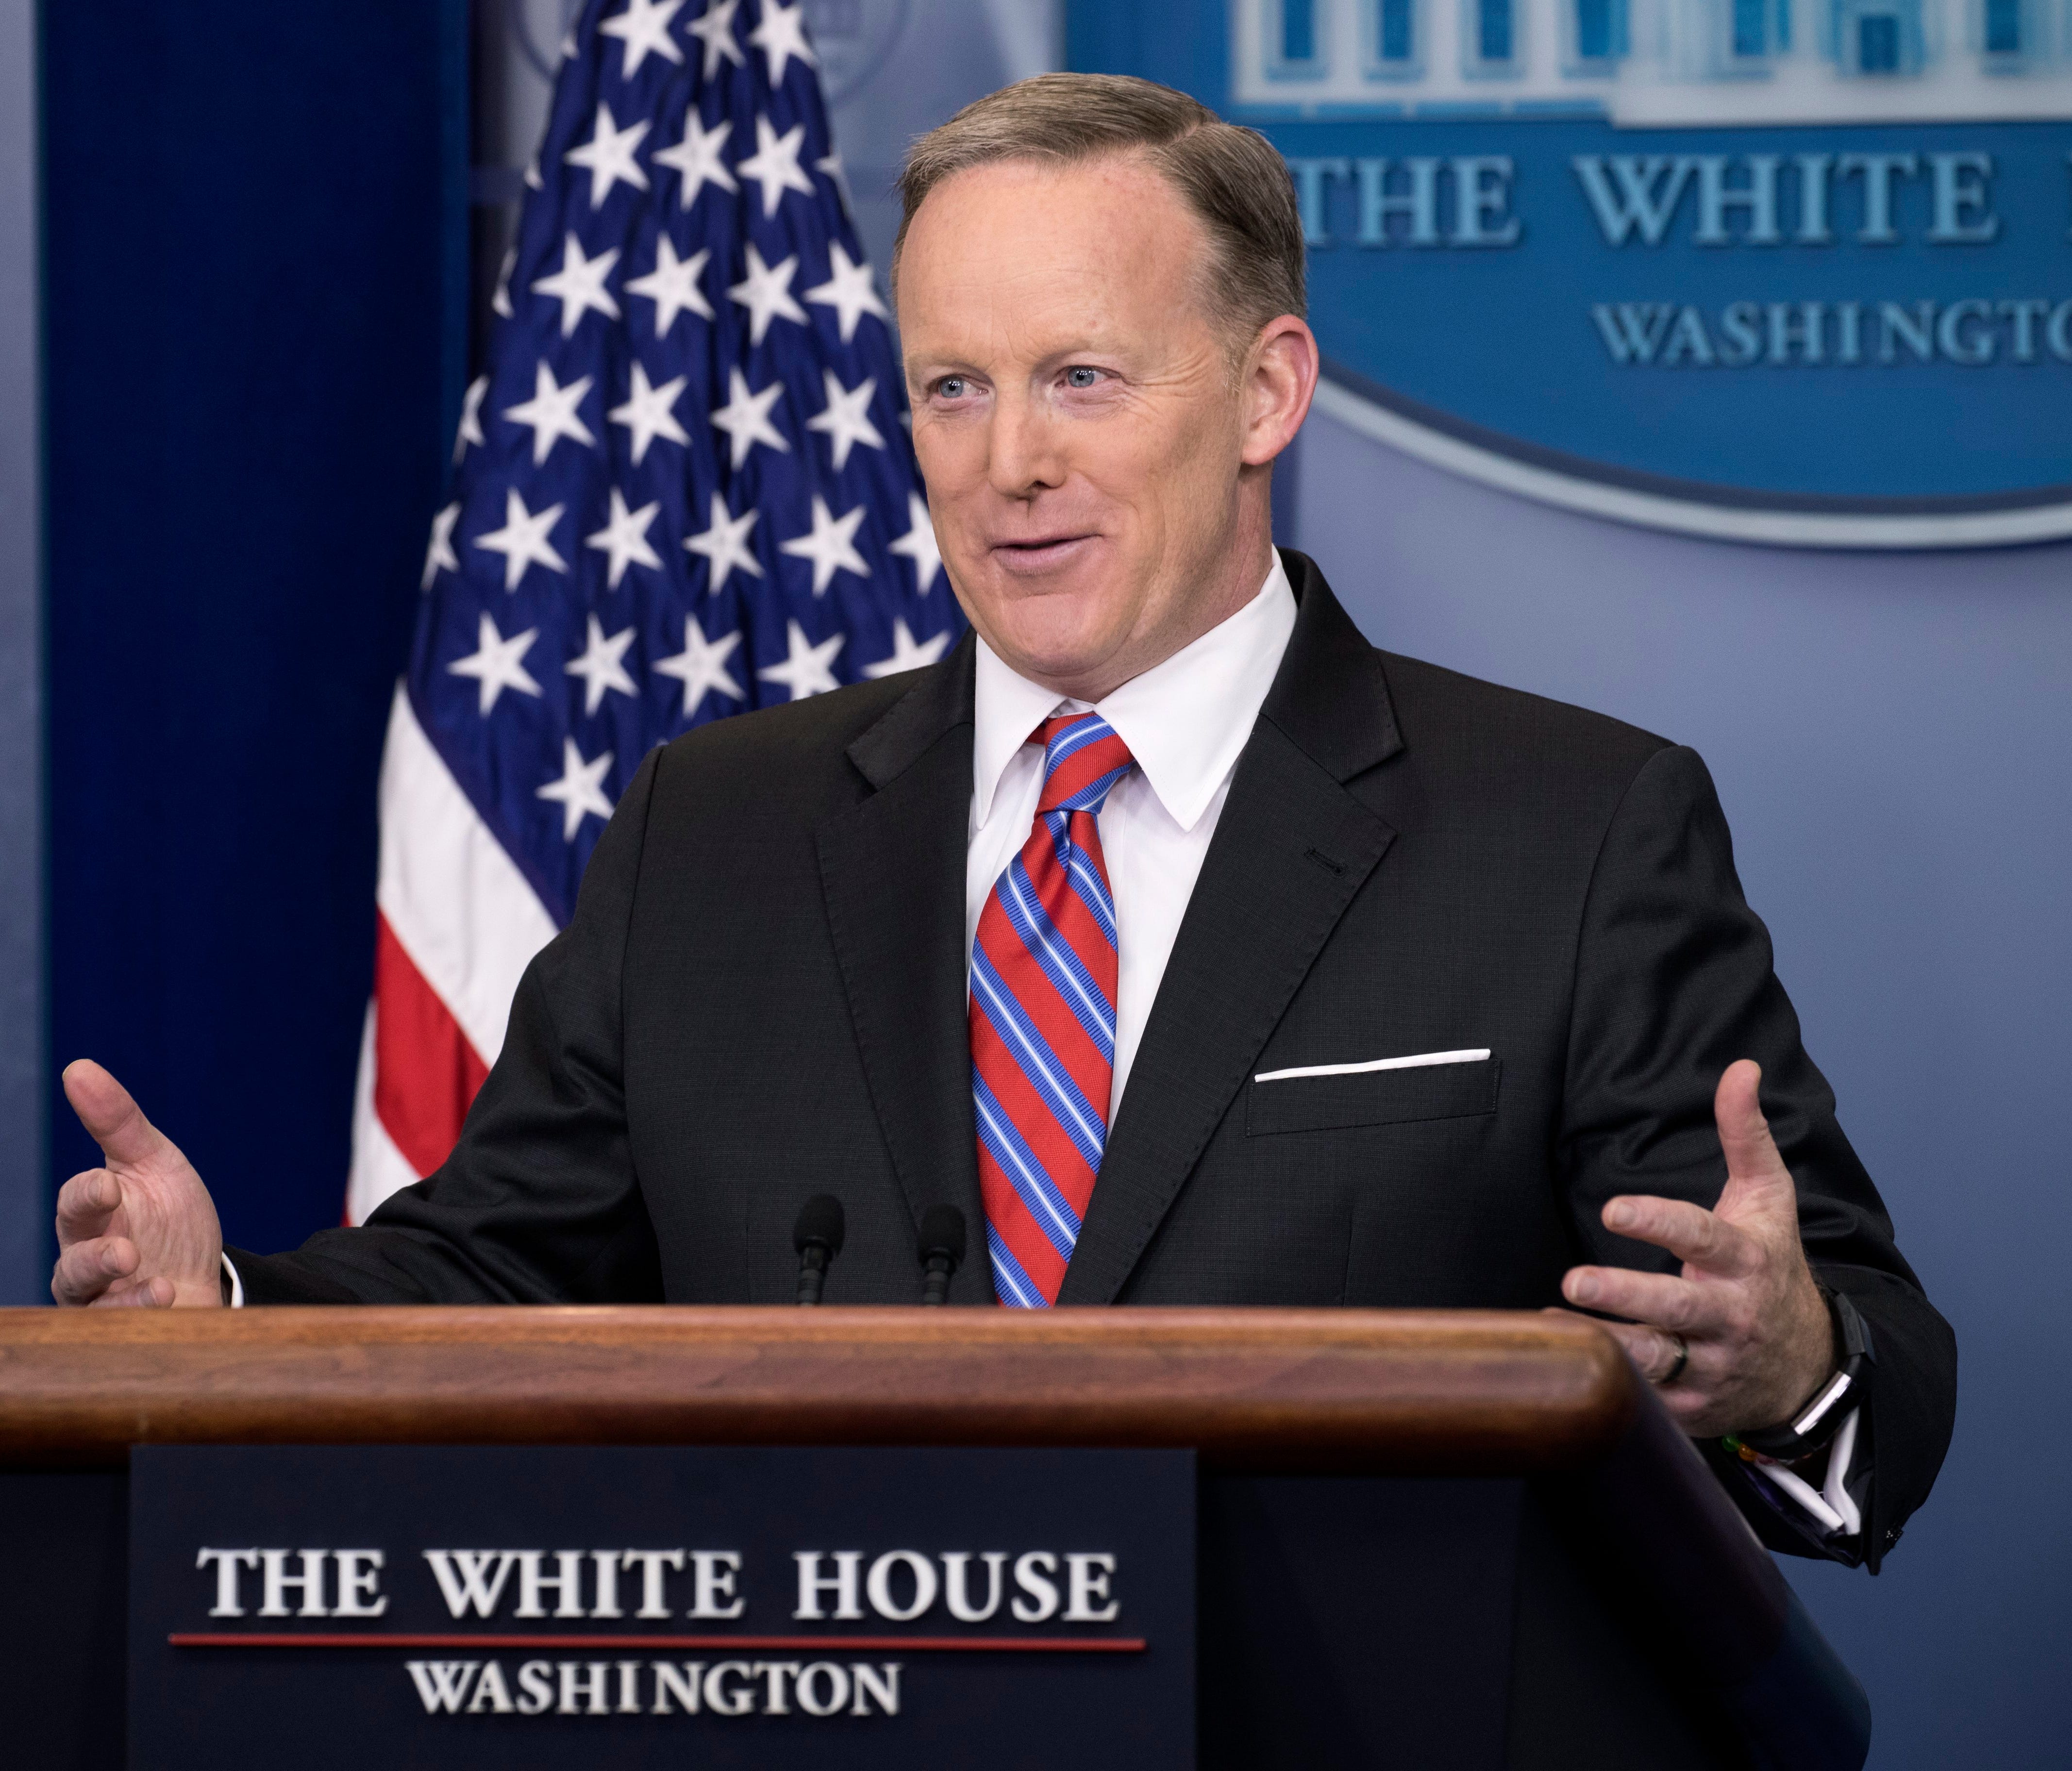 White House Press Secretary Sean Spicer responds to a question from the news media during the daily press briefing in the Brady Press Briefing Room at the White House in Washington, D.C, USA, on March 28.